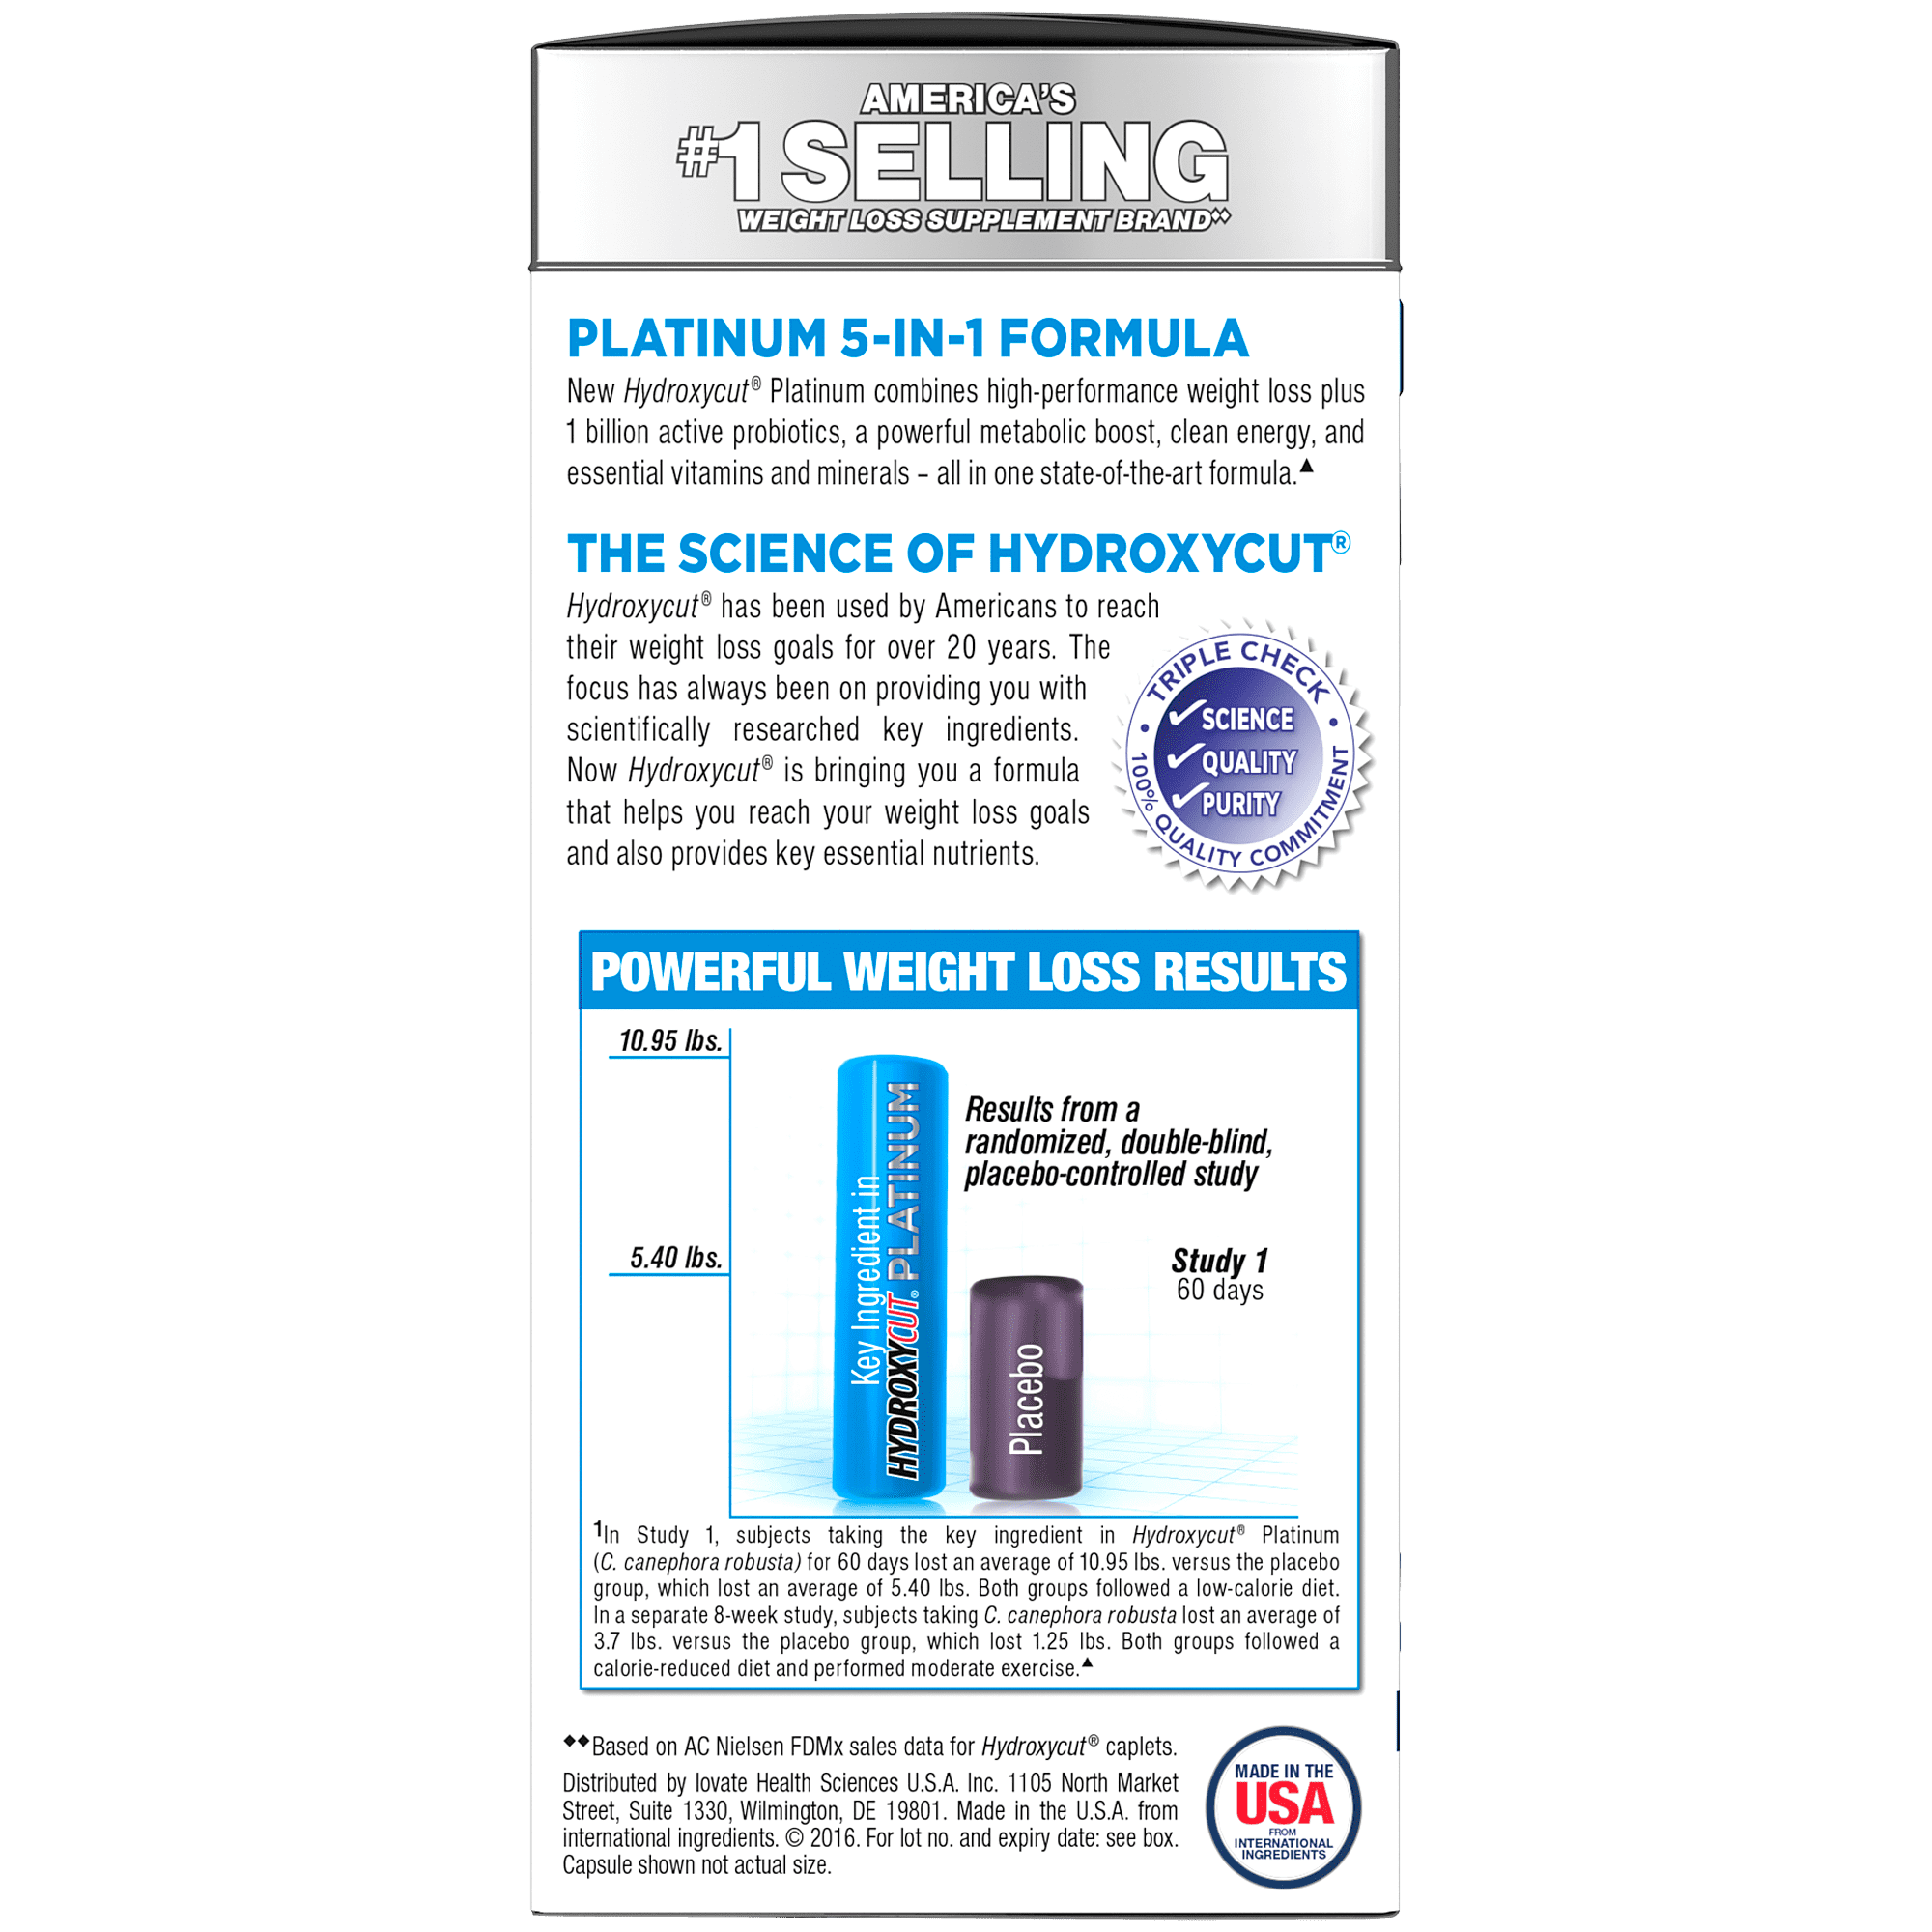 Platinum Weight Loss Supplements with Active Probiotics & Vitamins, Boost Metabolism and Supplement Energy with Naturally Sourced Caffeine, 60 Count